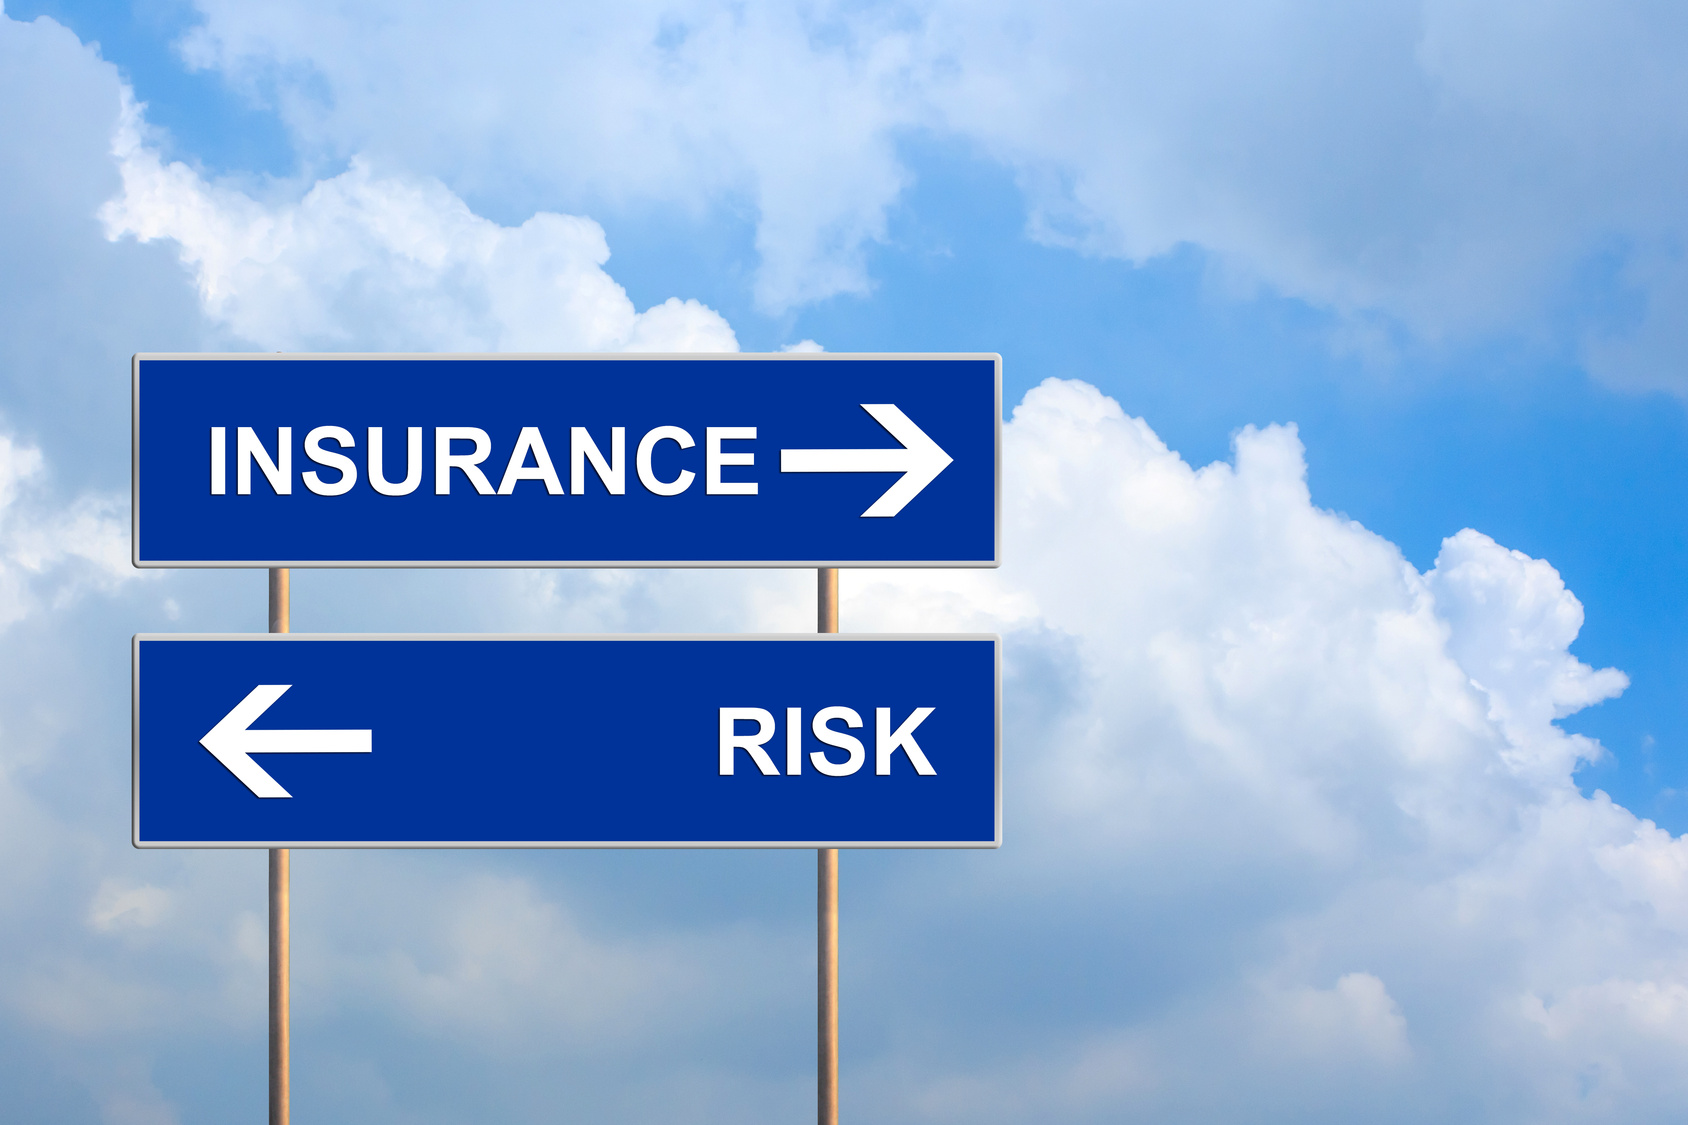 Youngs Insurance provides tips to Protect Your Business from Inside Risks